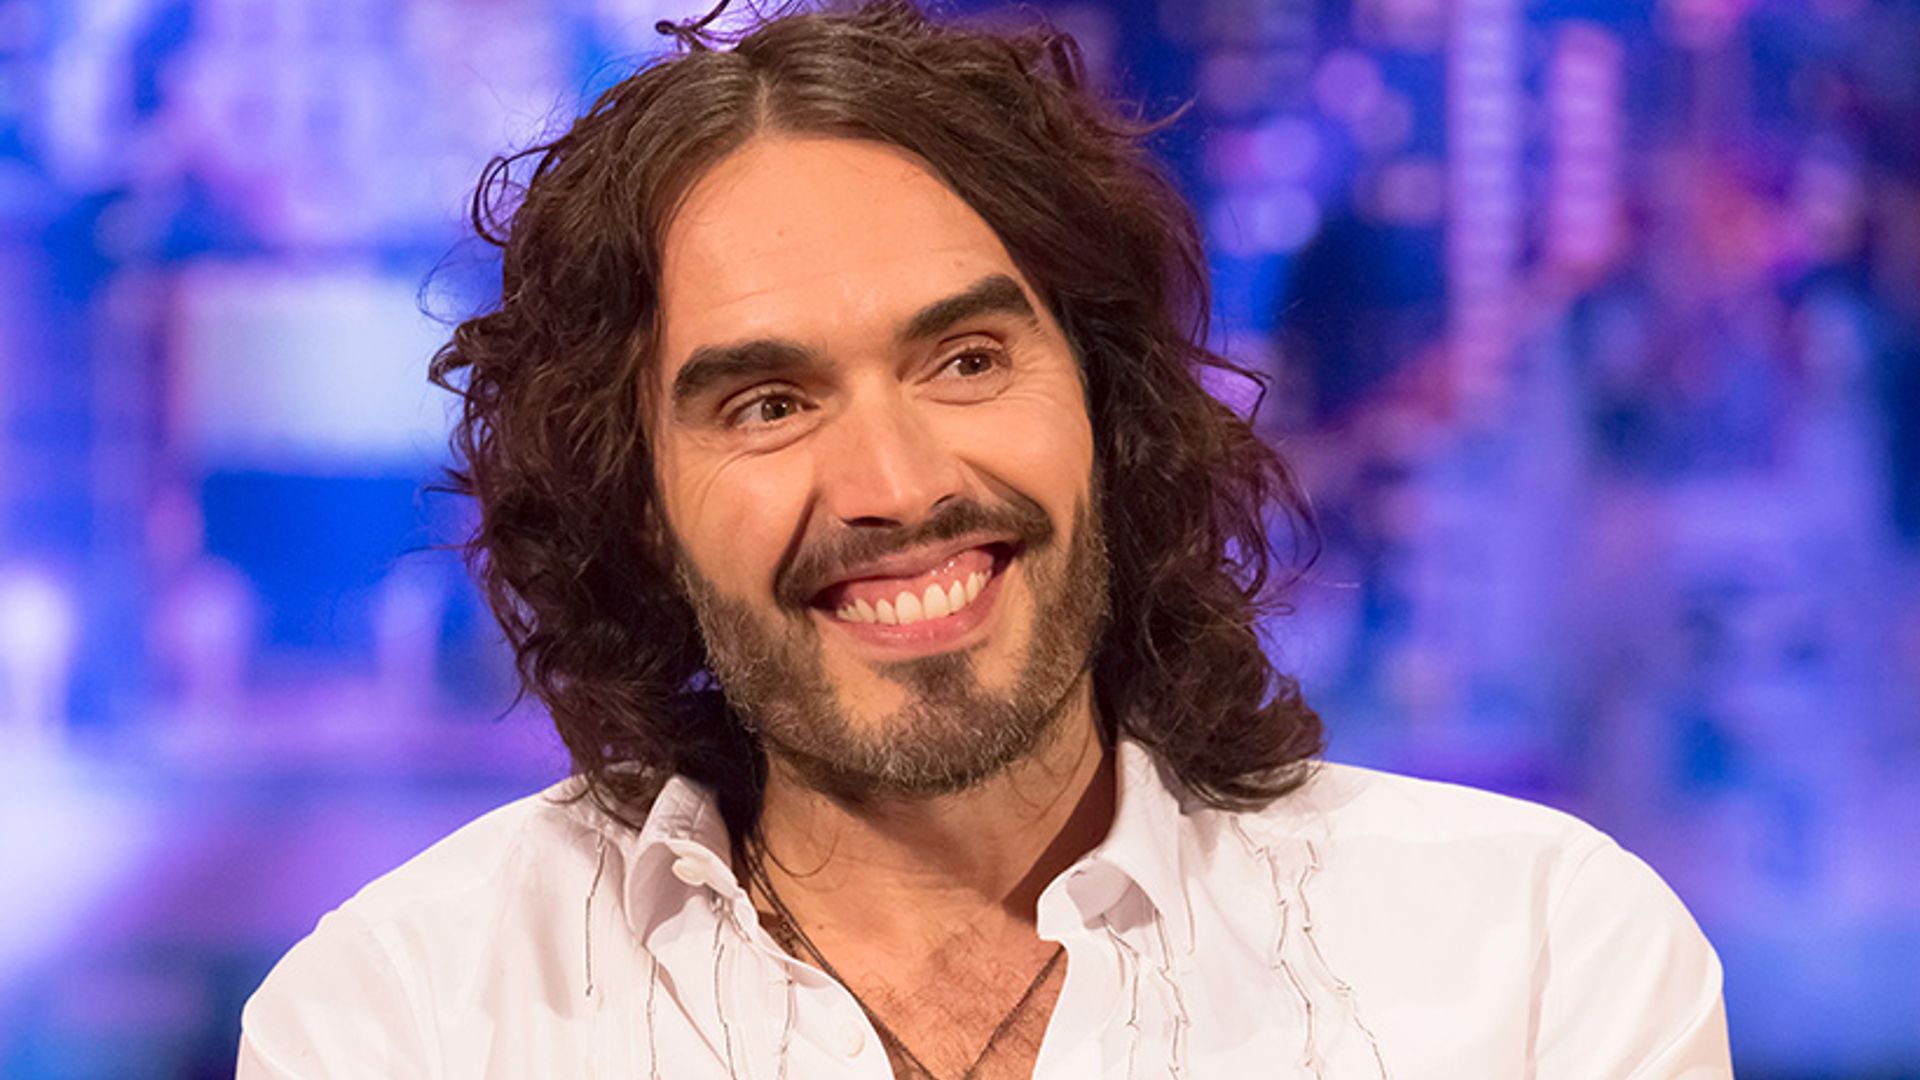 Russell Brand marries Laura Gallacher in star-studded ceremony